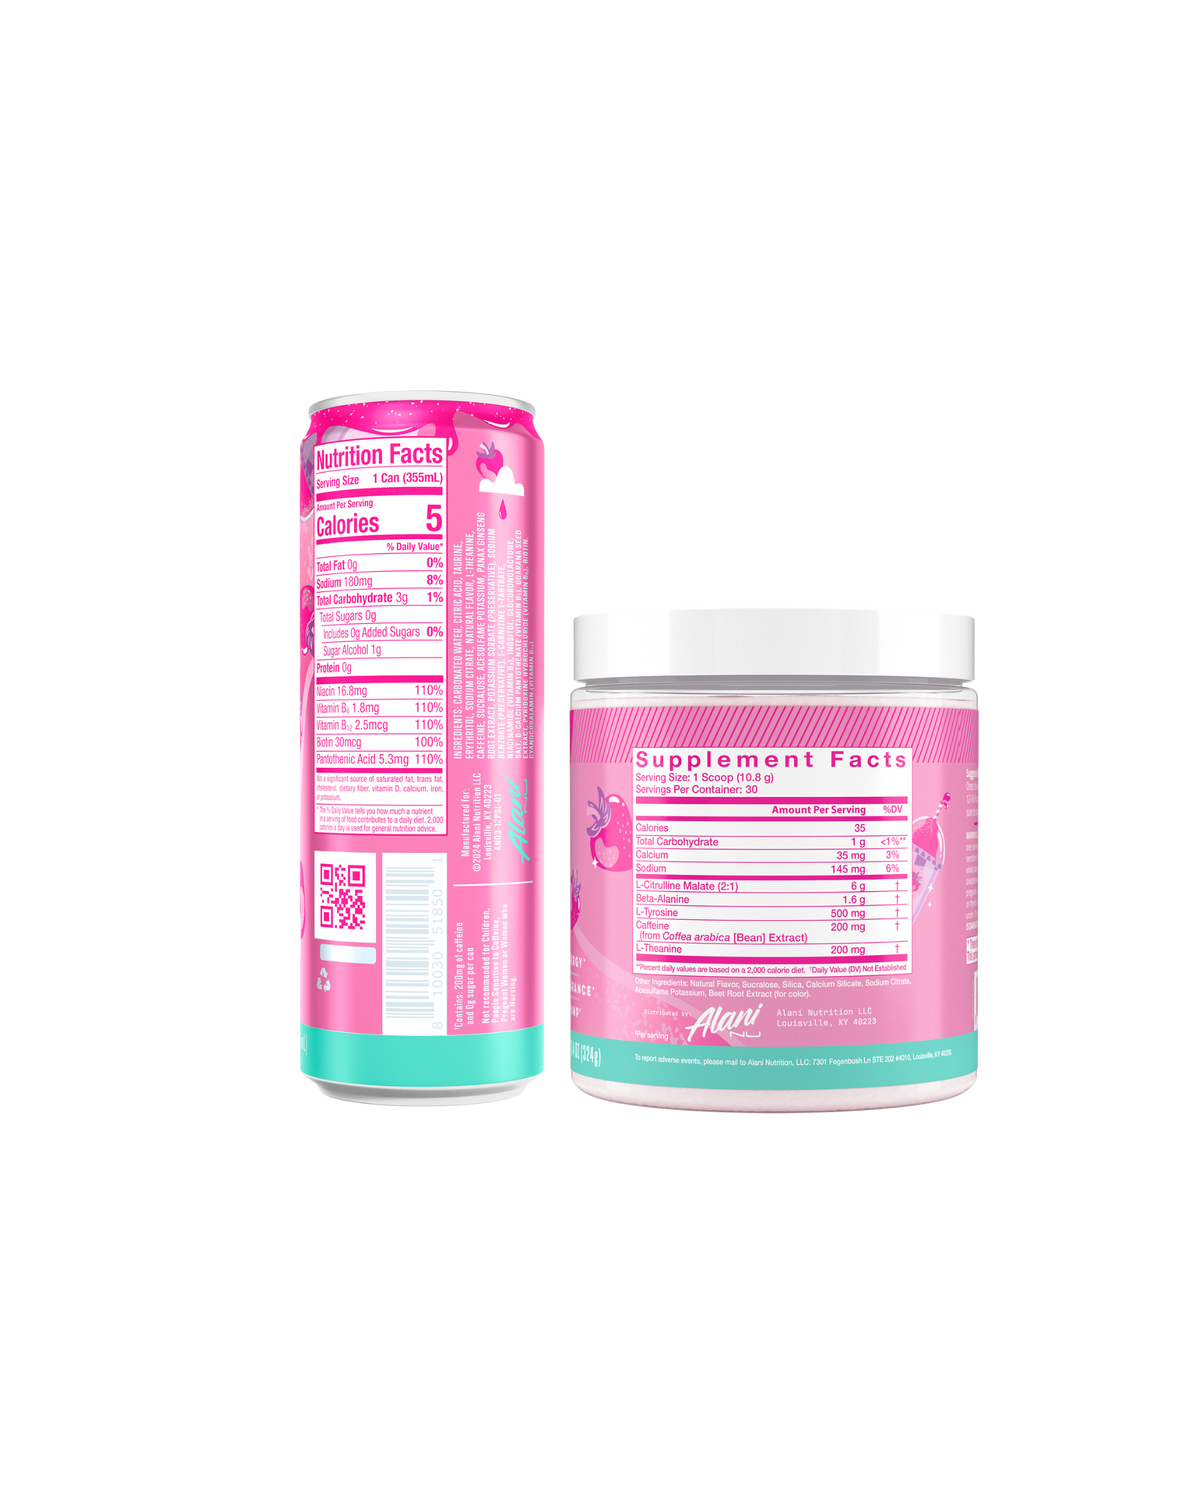 The back view of an Alani Nu Pink Slush Energy Drink can and Pre-Workout tub, showing nutrition facts.  